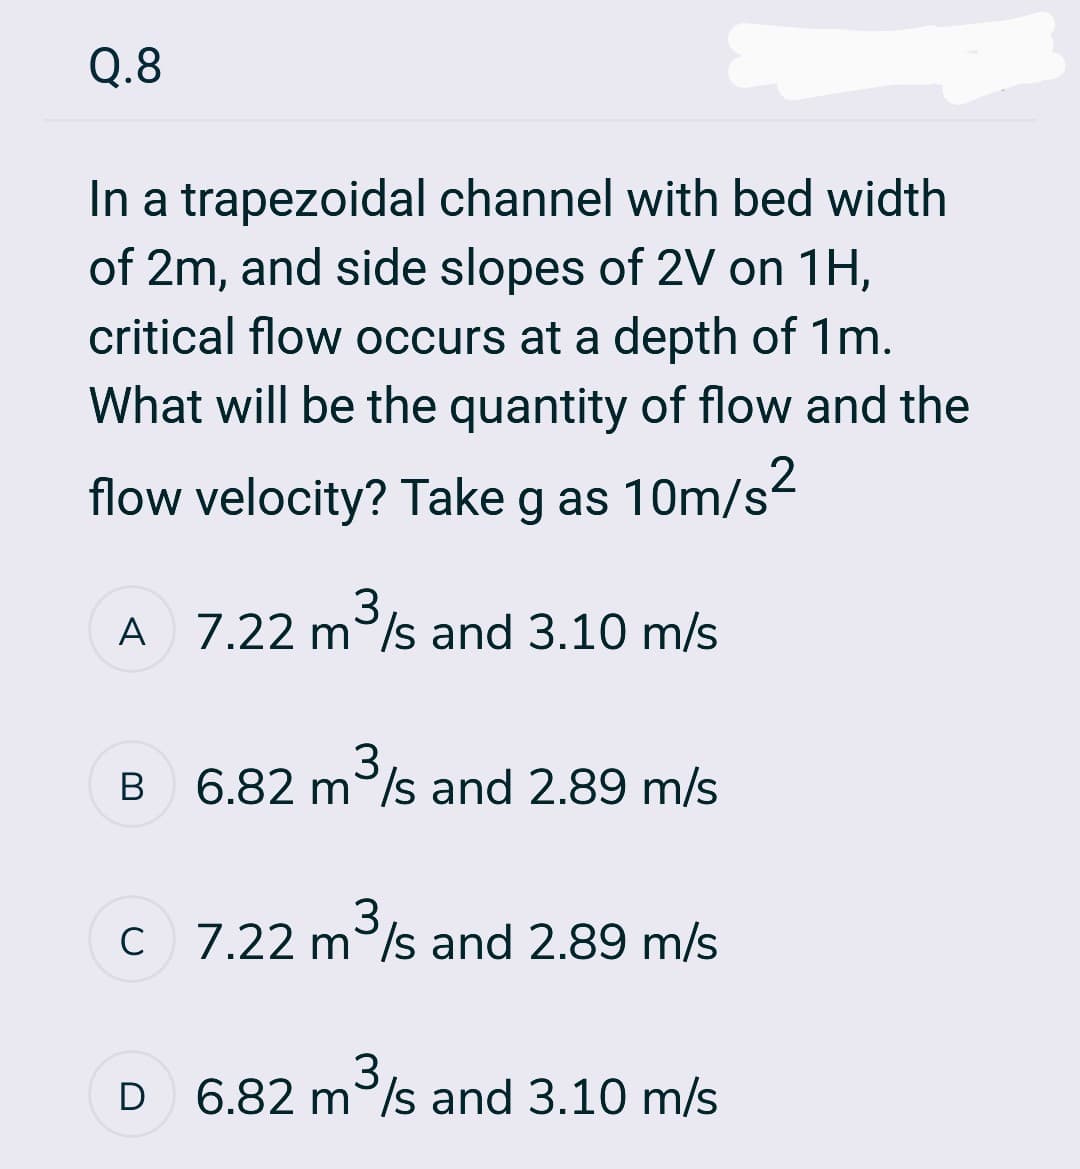 Q.8
In a trapezoidal channel with bed width
of 2m, and side slopes of 2V on 1H,
critical flow occurs at a depth of 1m.
What will be the quantity of flow and the
flow velocity? Take g as 10m/s²
A 7.22 m³/s and 3.10 m/s
3
B
3
6.82 m³/s and 2.89 m/s
c 7.22 m³/s and 2.89 m/s
3
D
3
6.82 m³/s and 3.10 m/s